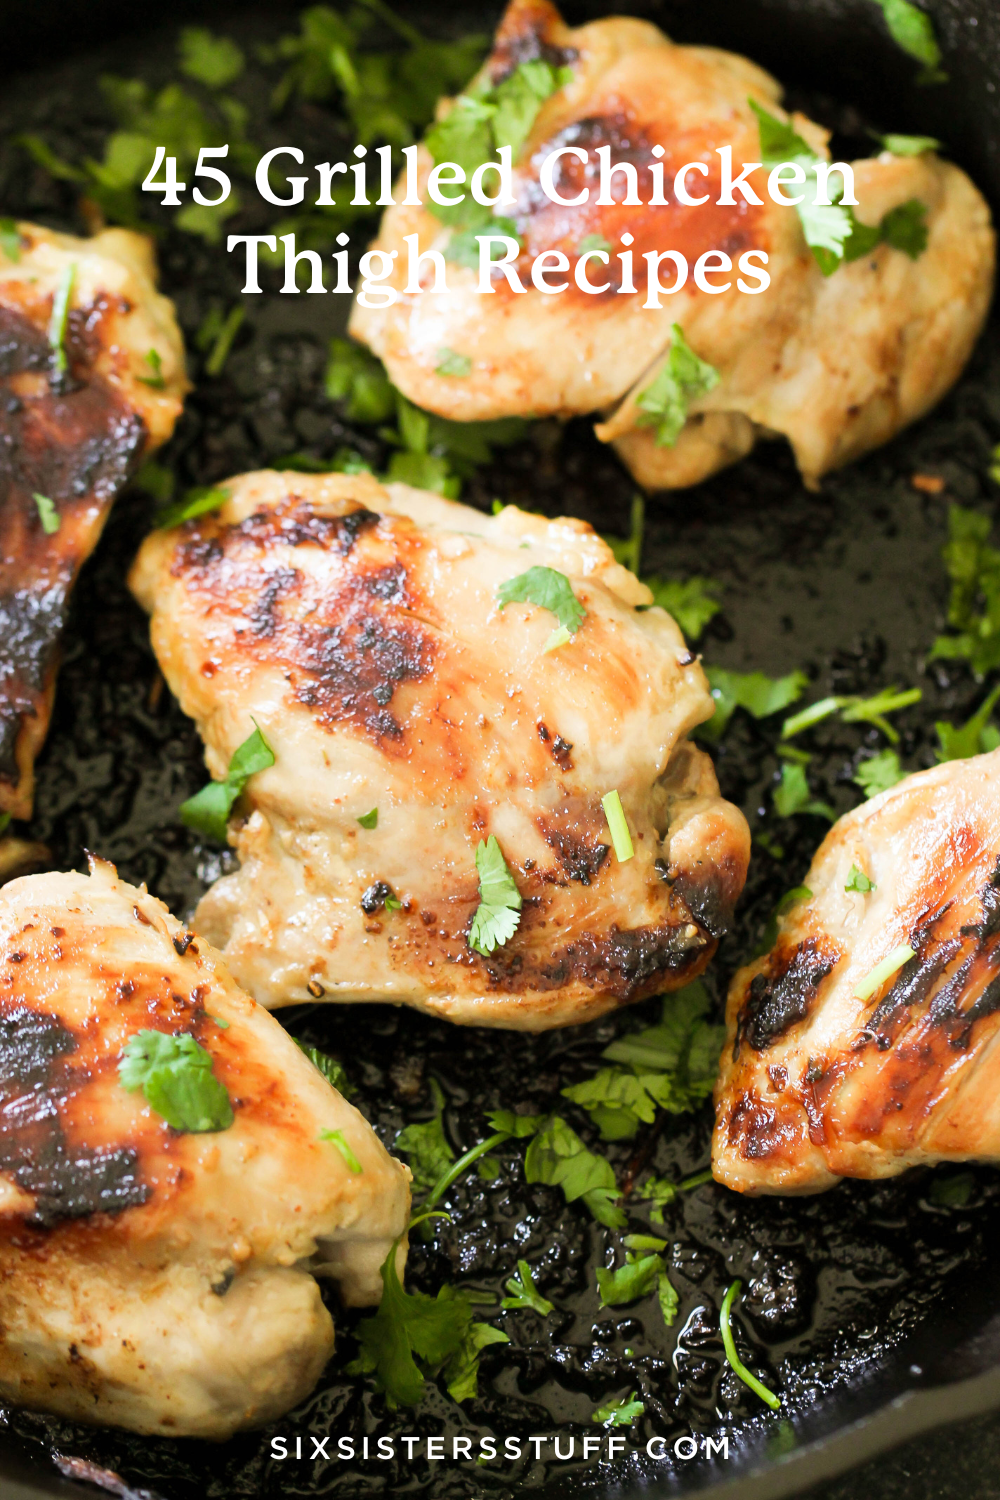 45 Grilled Chicken Thigh Recipes